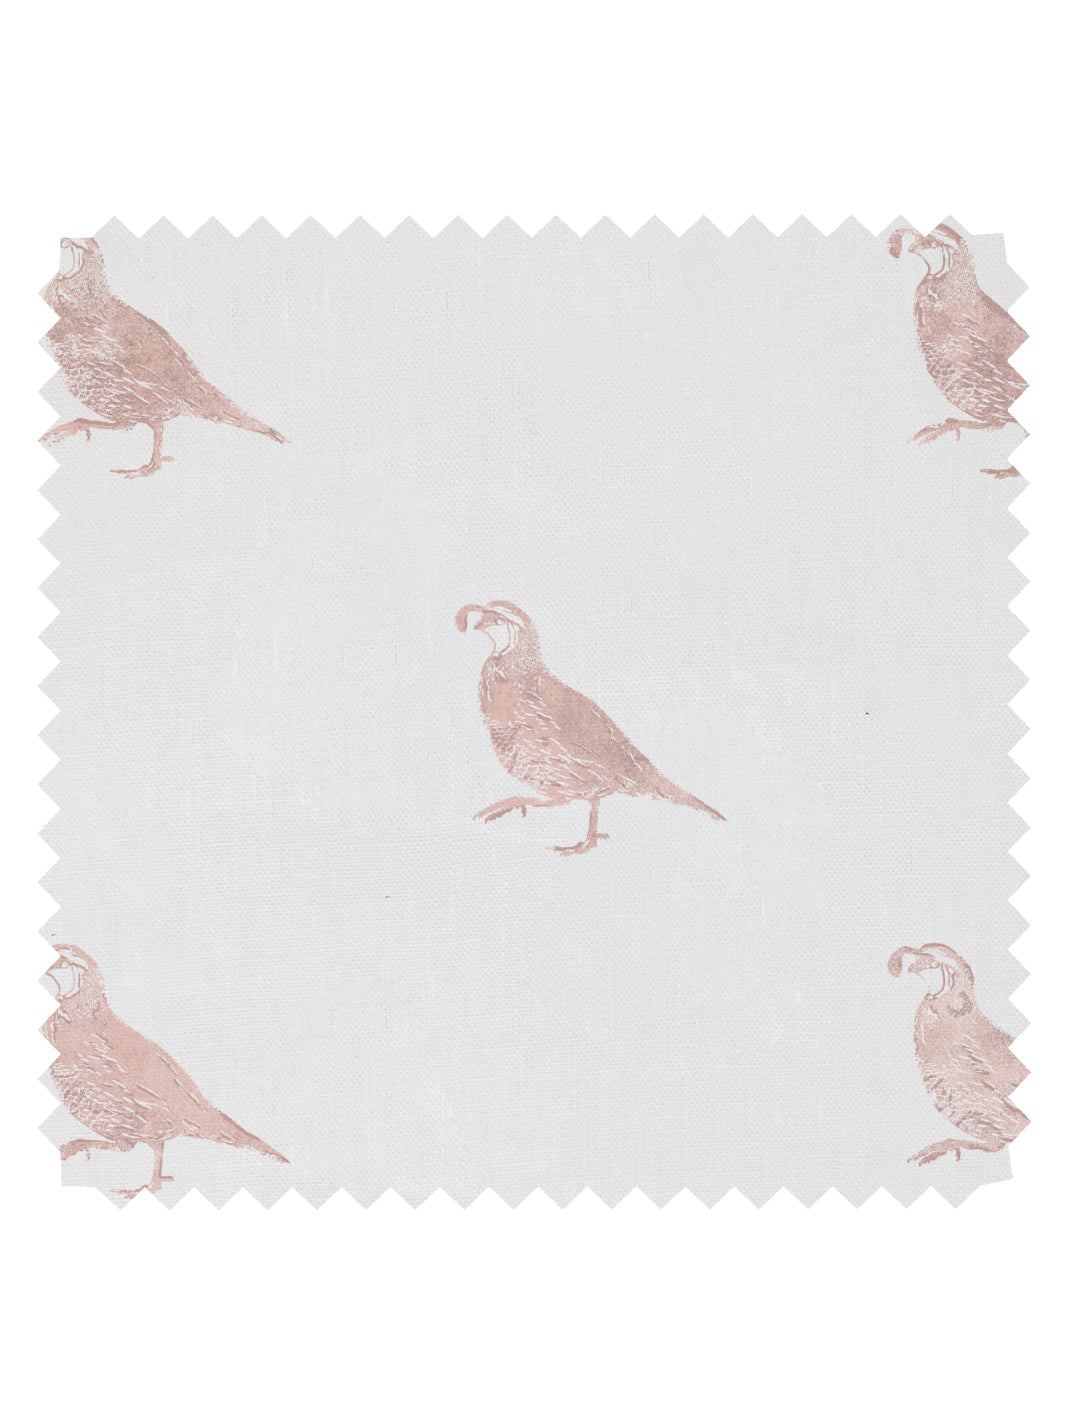 'California Quail' Linen Fabric by Nathan Turner - Pink